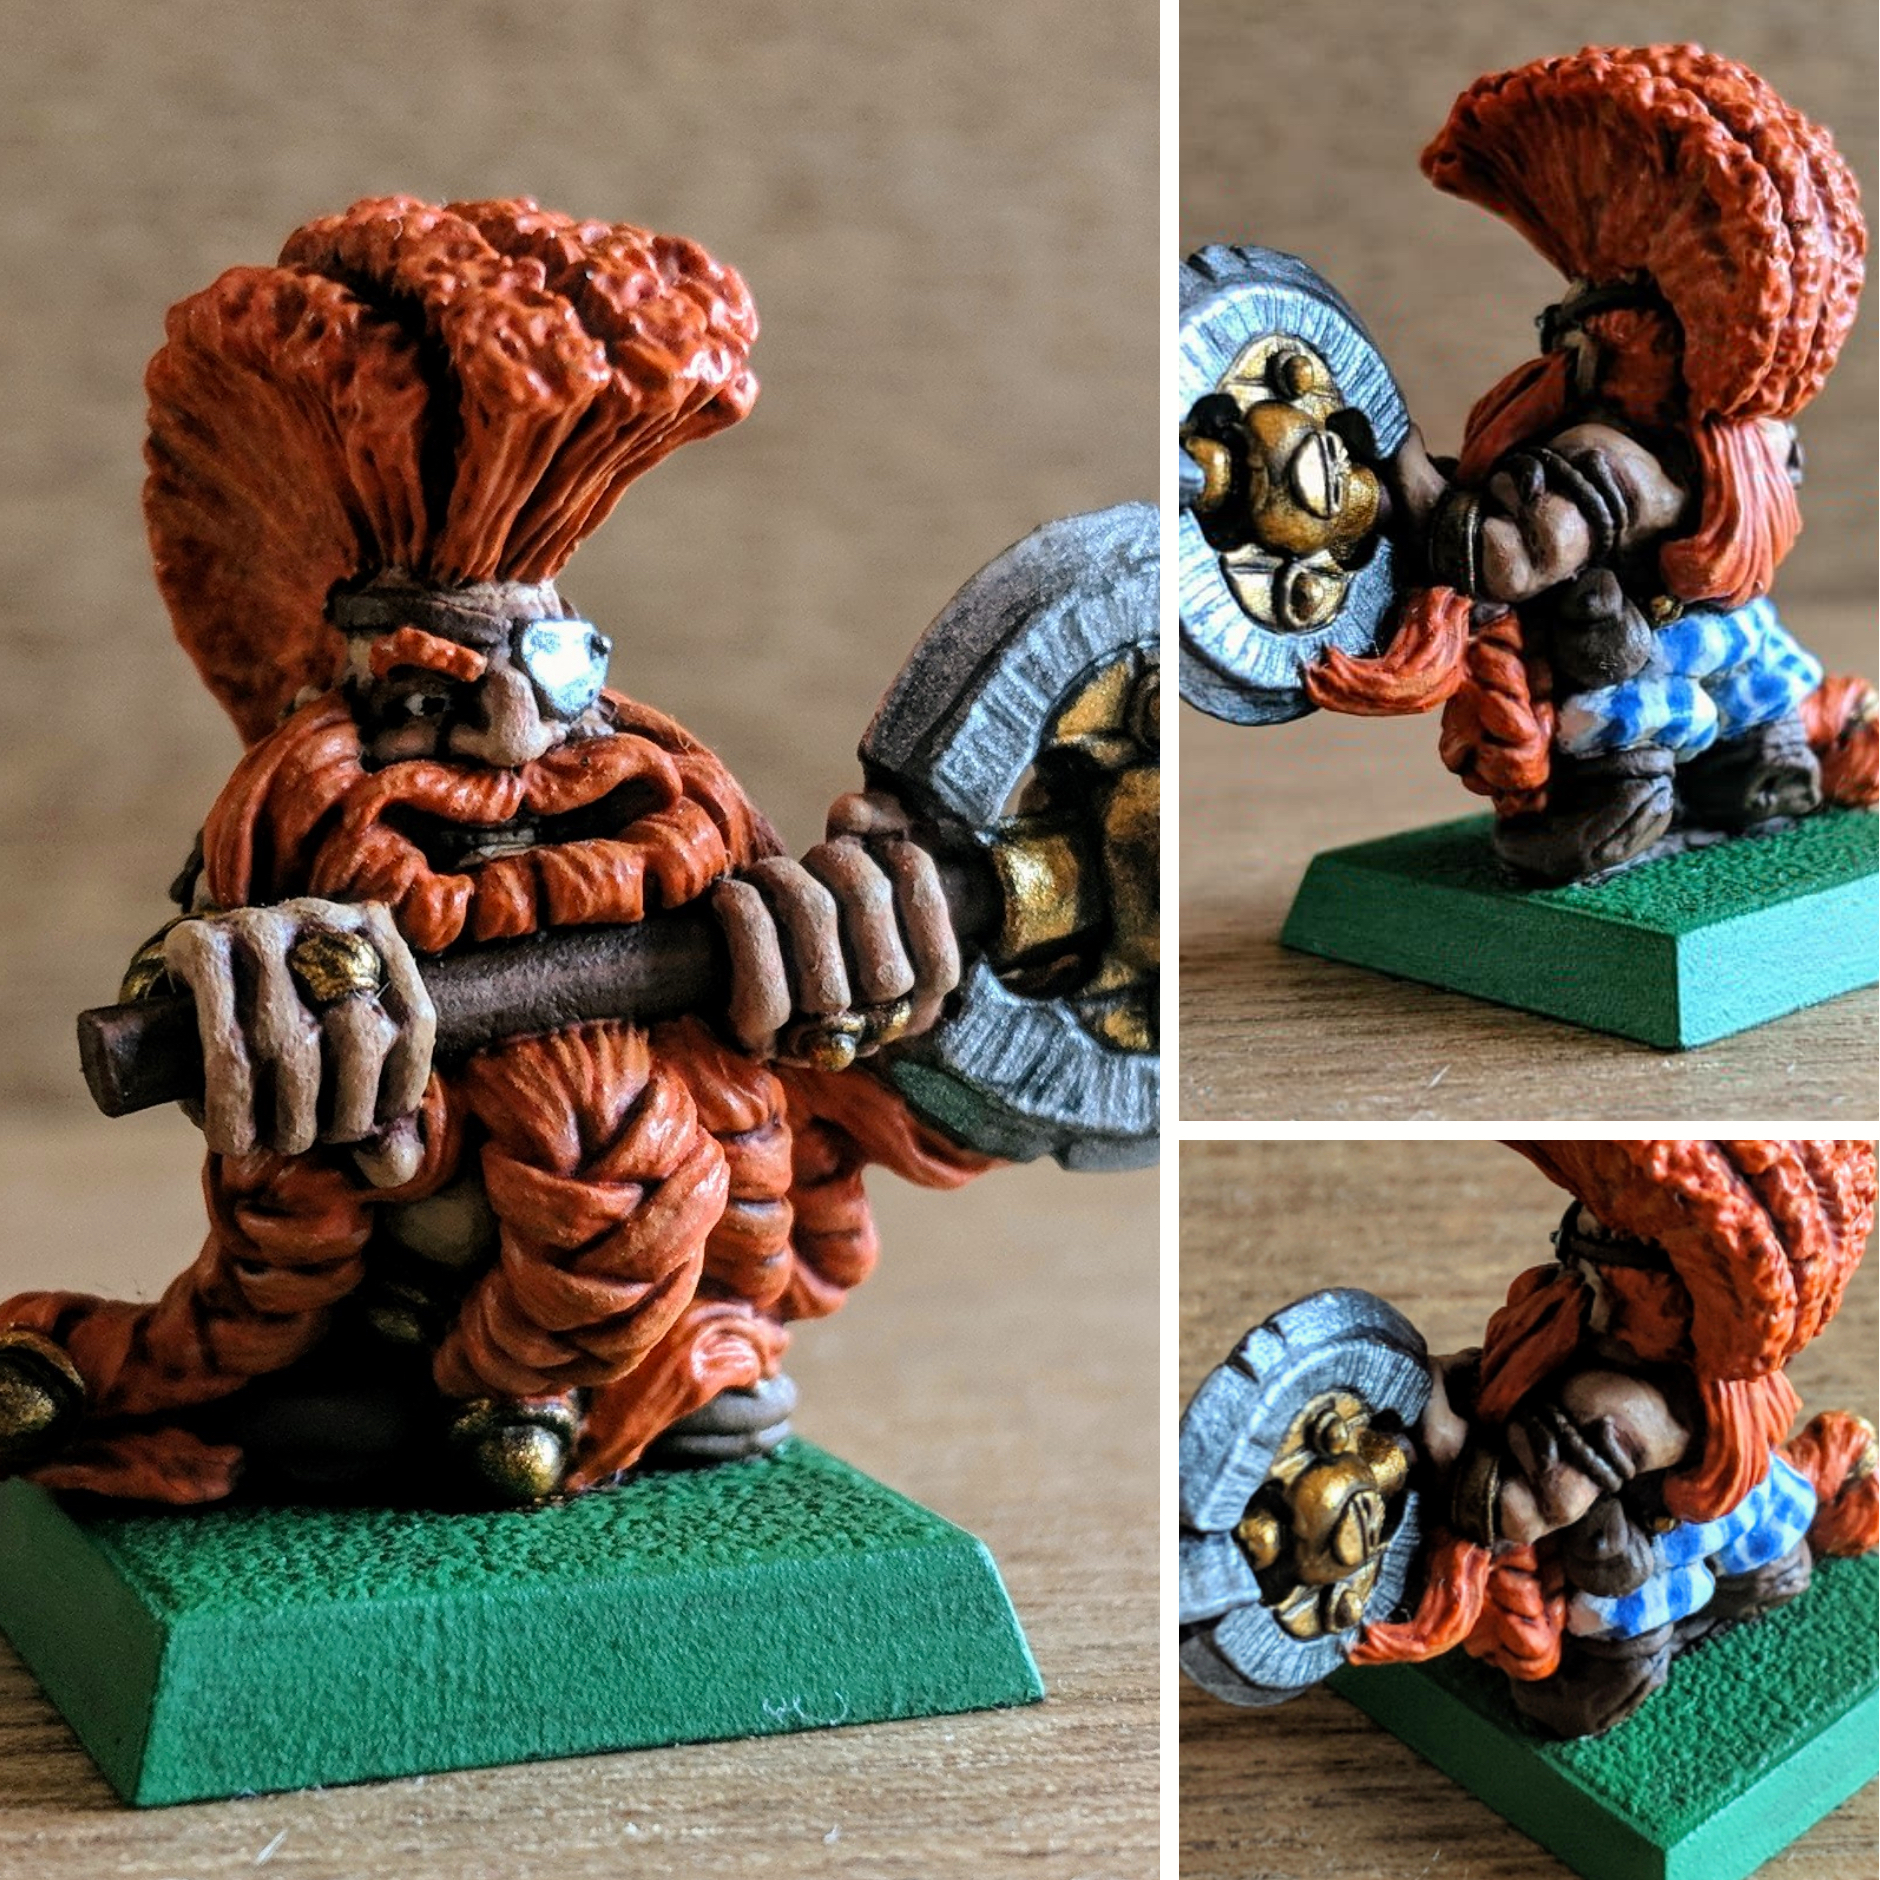 Calling this guy done after many years of on-again off-again painting spurts